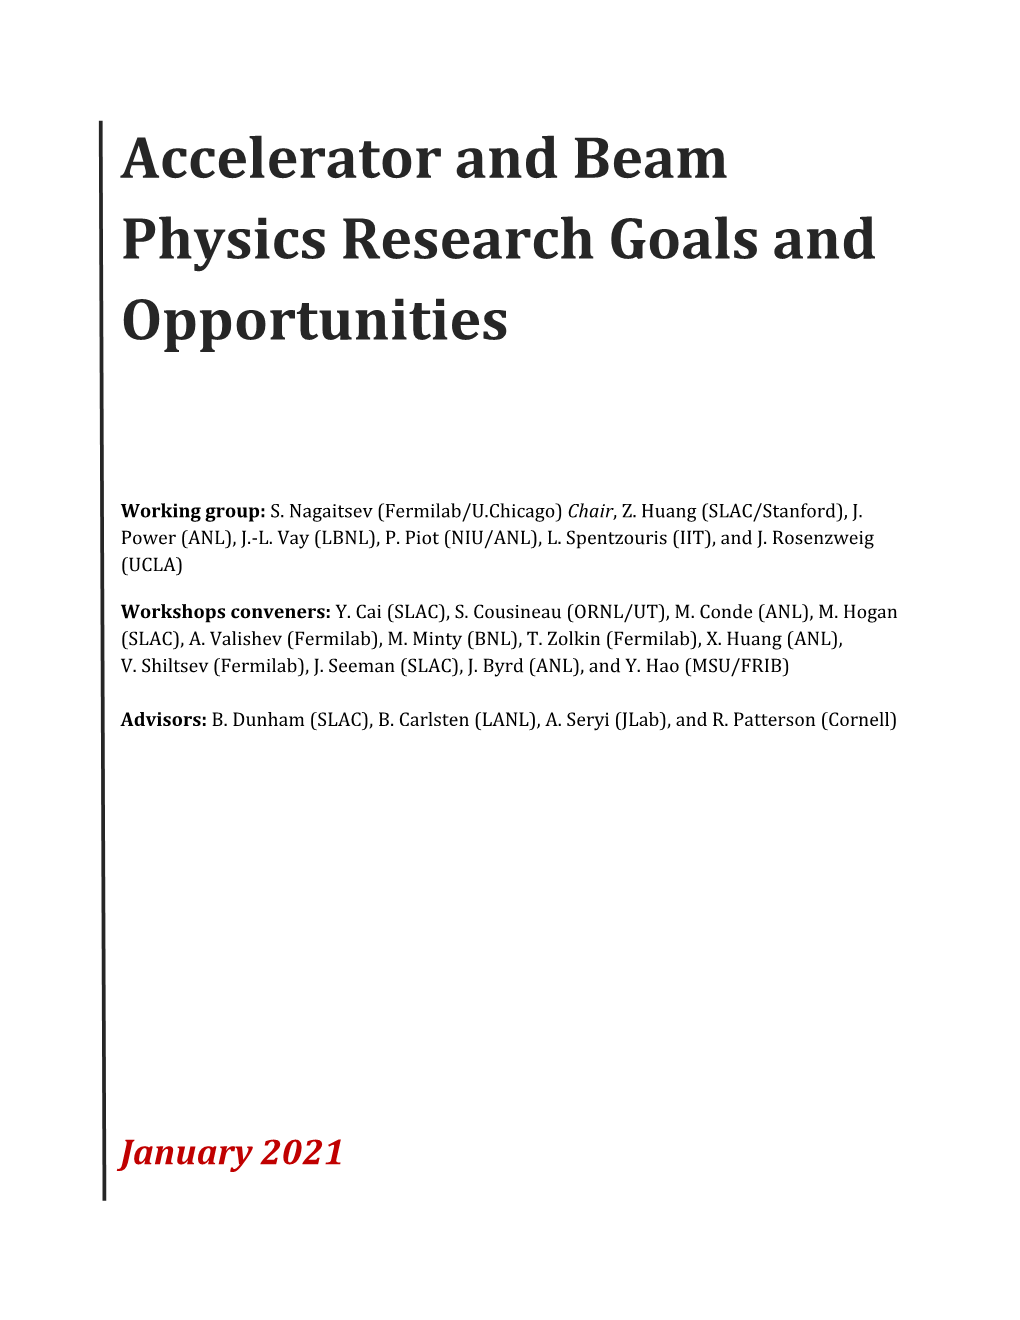 Accelerator and Beam Physics Research Goals and Opportunities